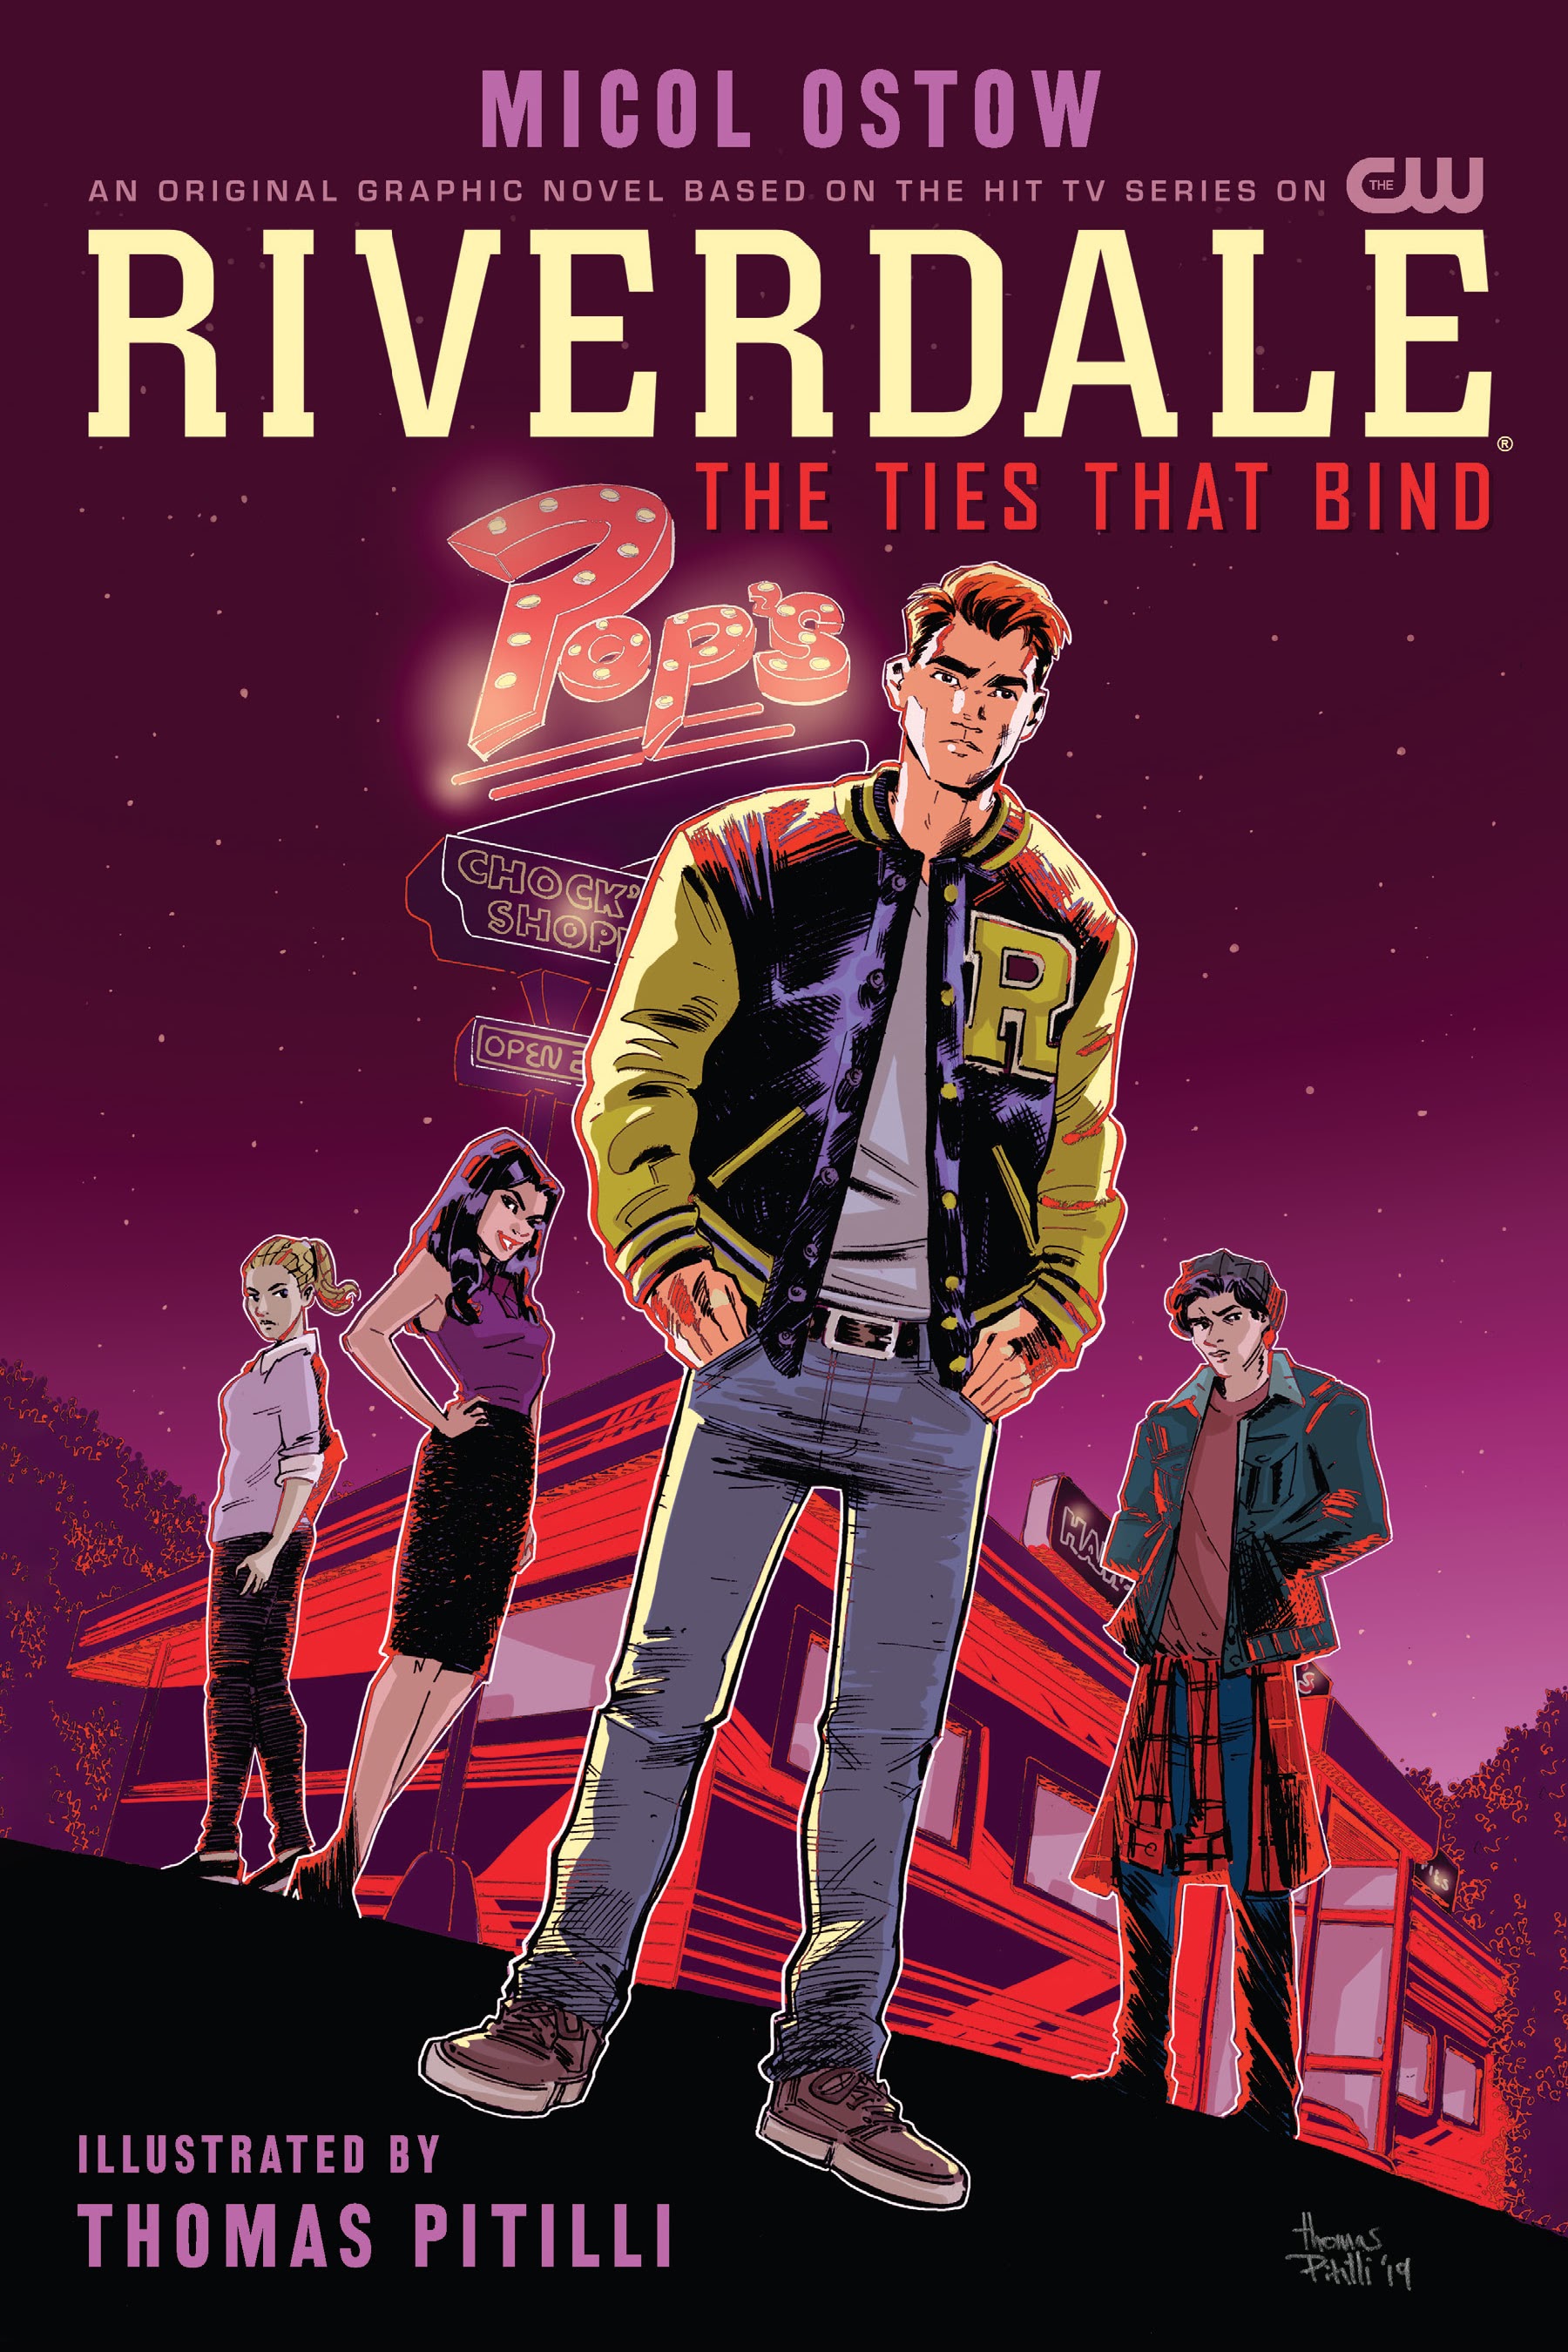 Read online Riverdale: The Ties That Bind comic -  Issue # TPB - 1